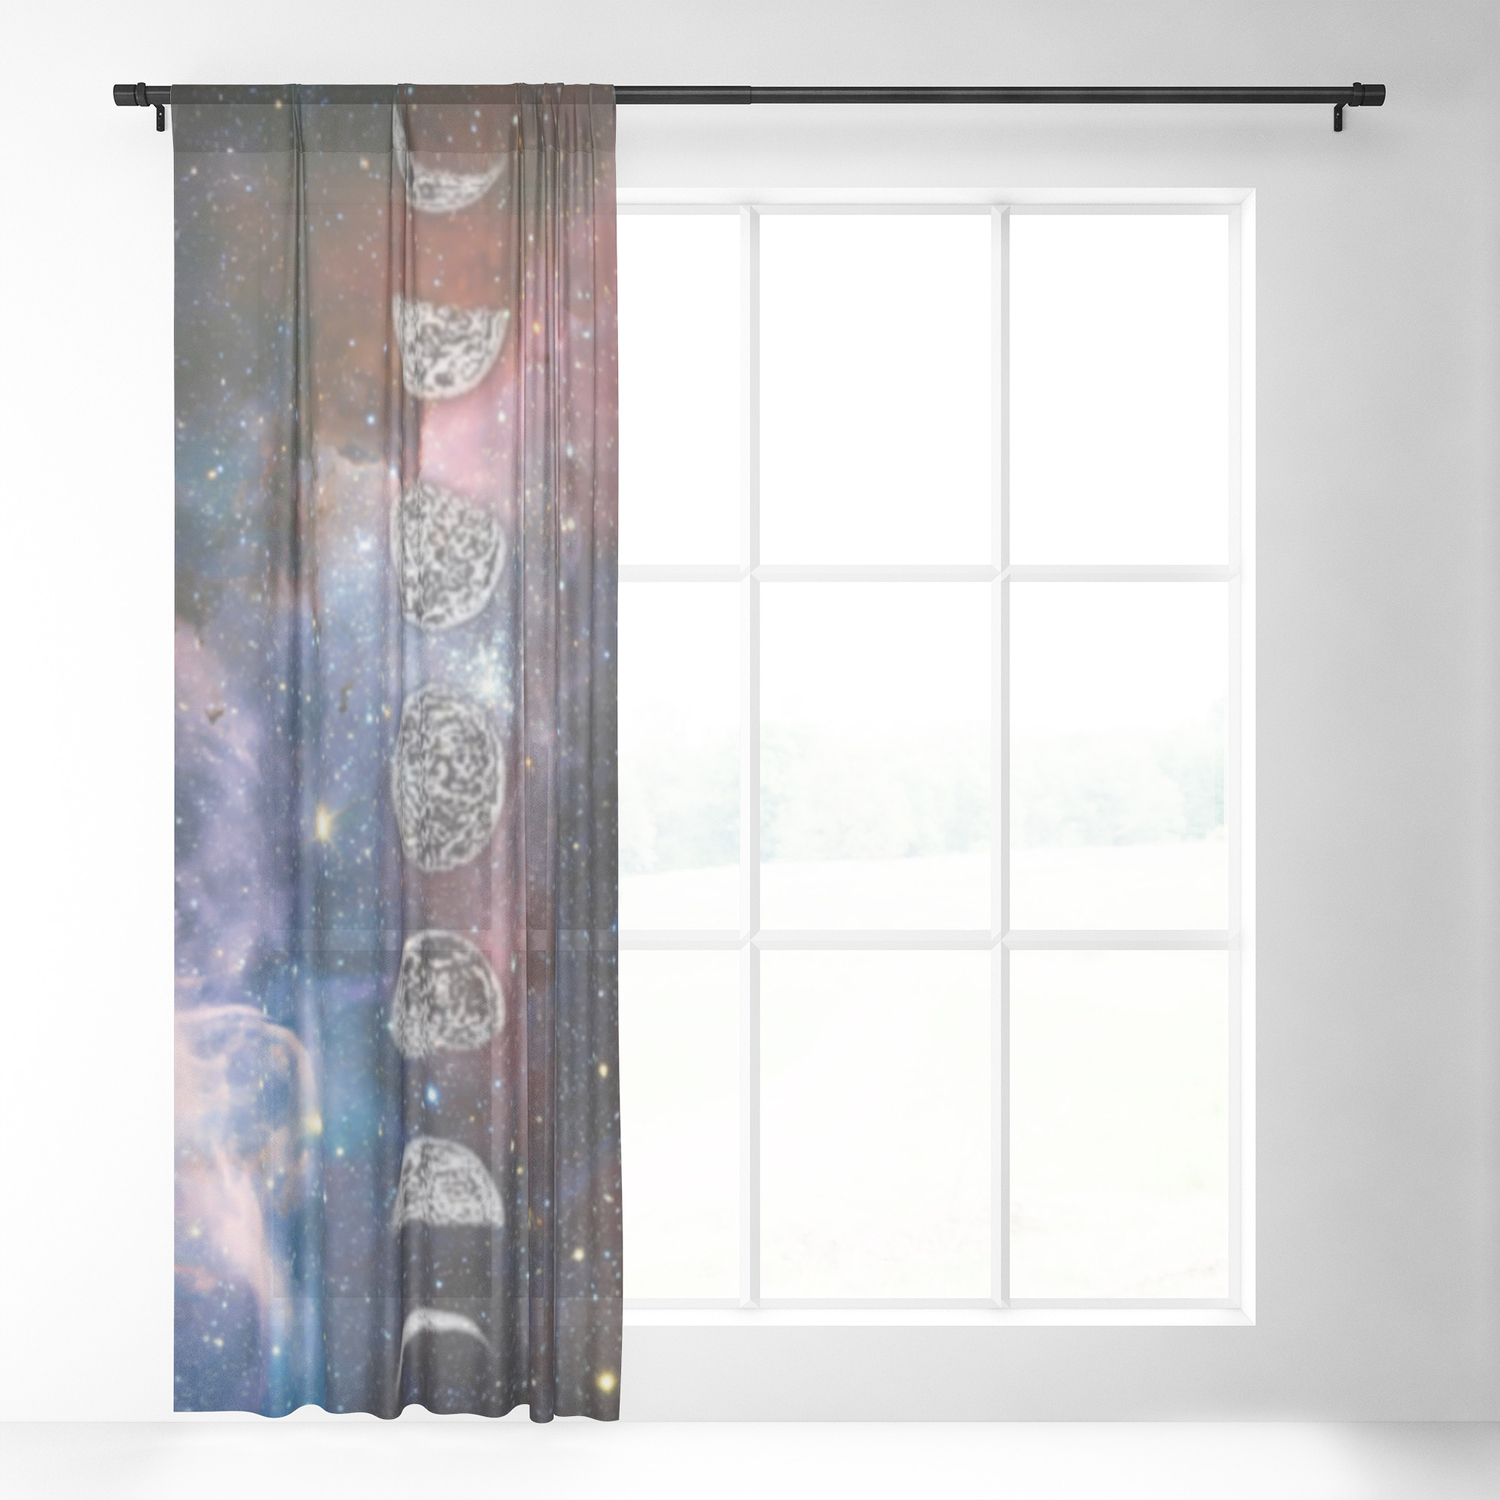 Celestial Fireworks Space Window Curtain Space Decor Psychedelic Art Single or Double Panel Galaxy Curtain Sheer or Black Out Fabric